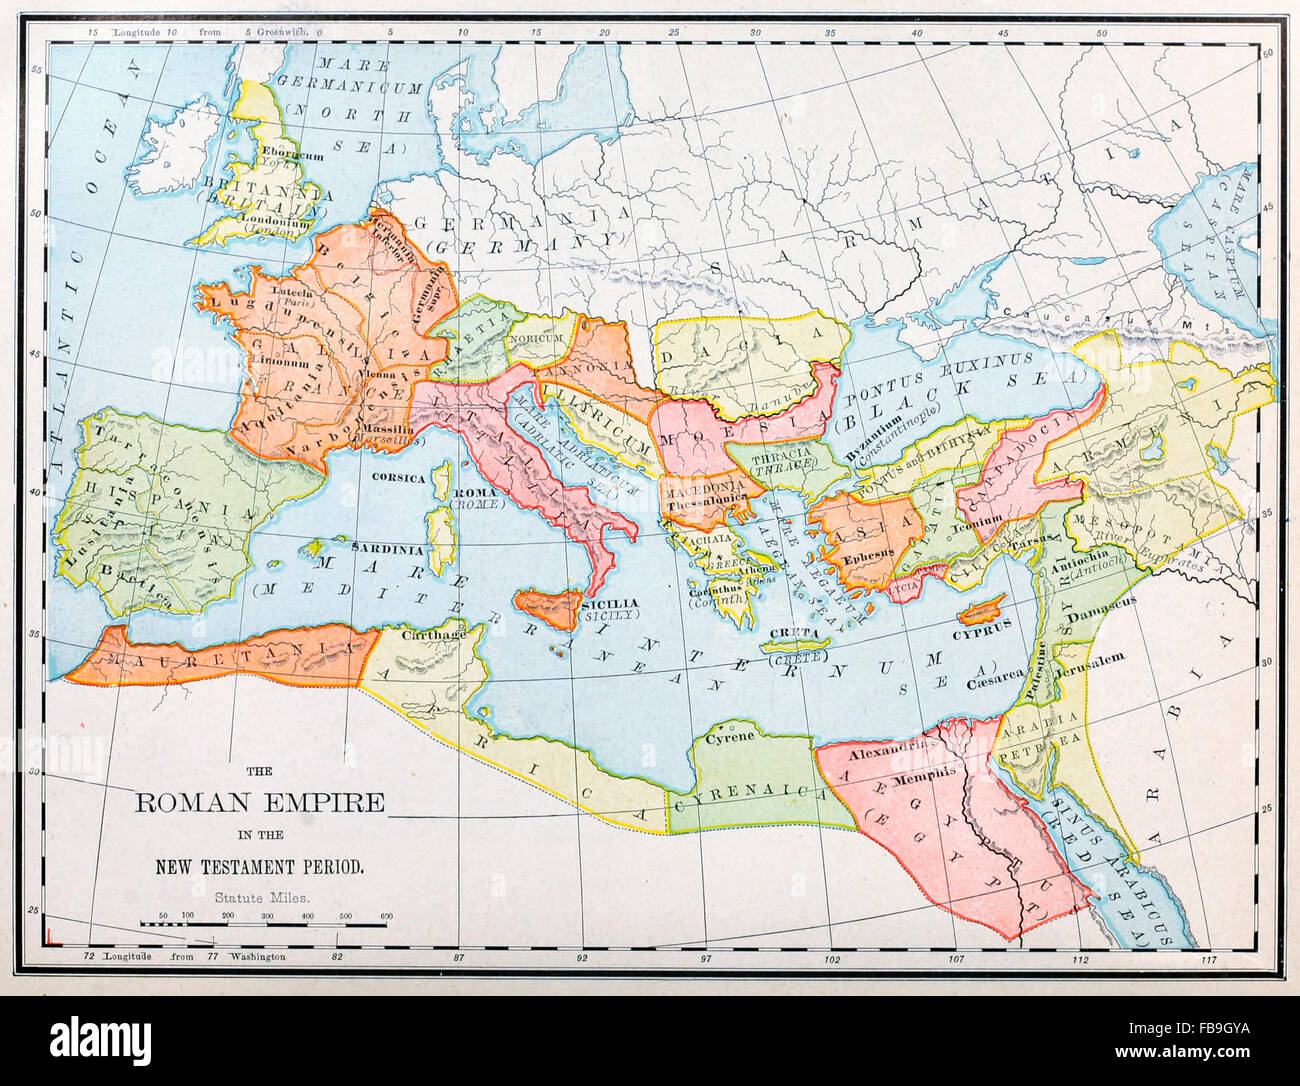 Map of the Roman Empire in the New Testament Period Stock Photo